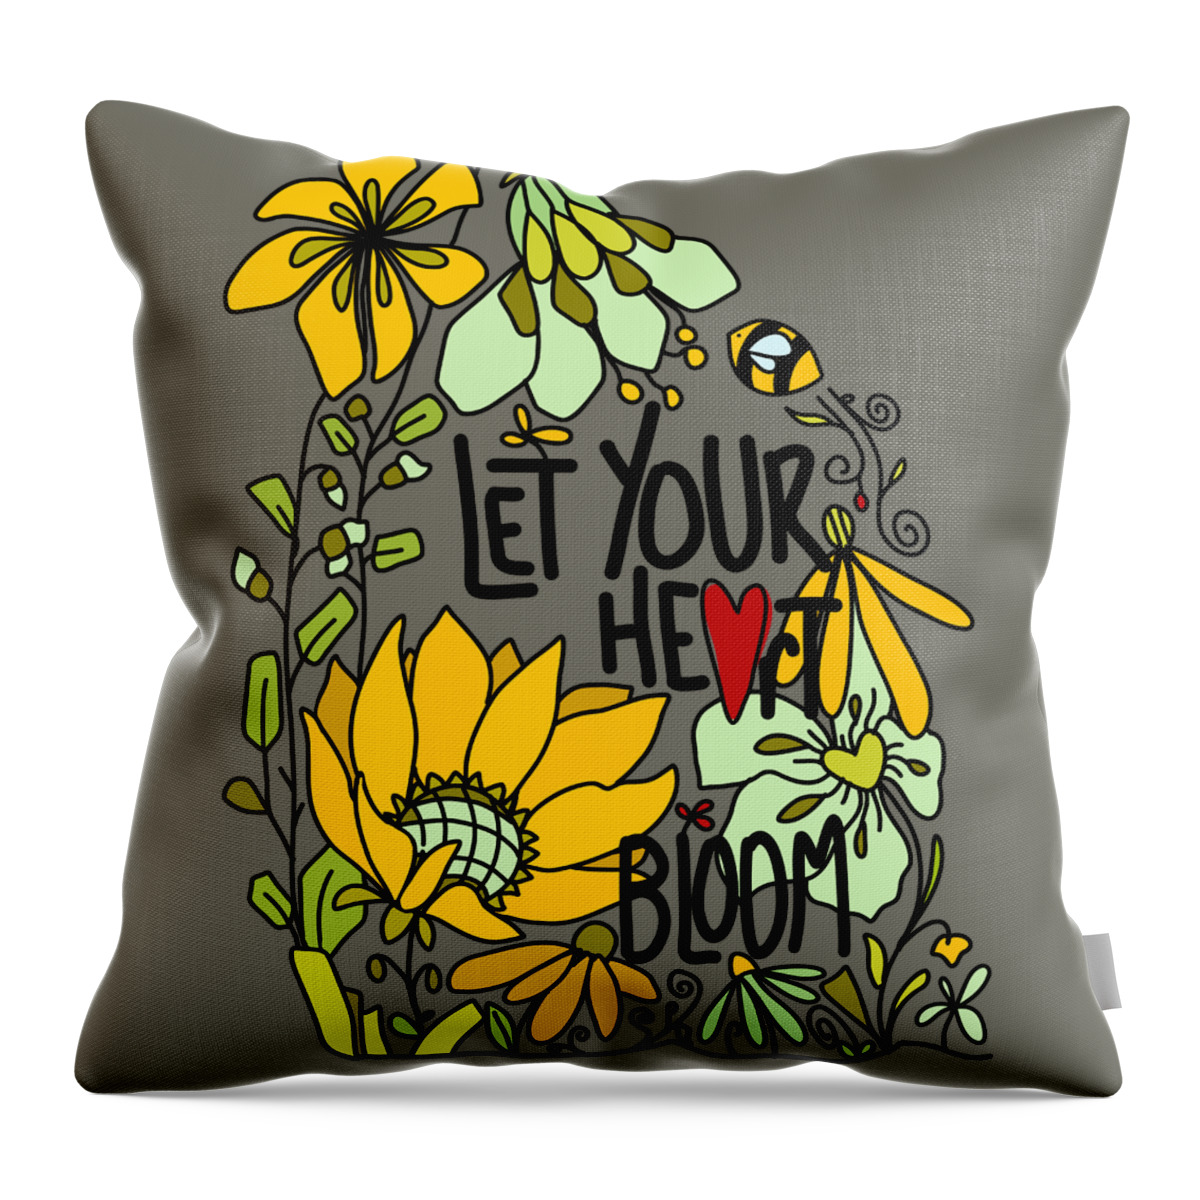 Let Your Heart Bloom Throw Pillow featuring the digital art Let Your Heart Bloom - Mint Green and Yellow and Black Line Art by Patricia Awapara